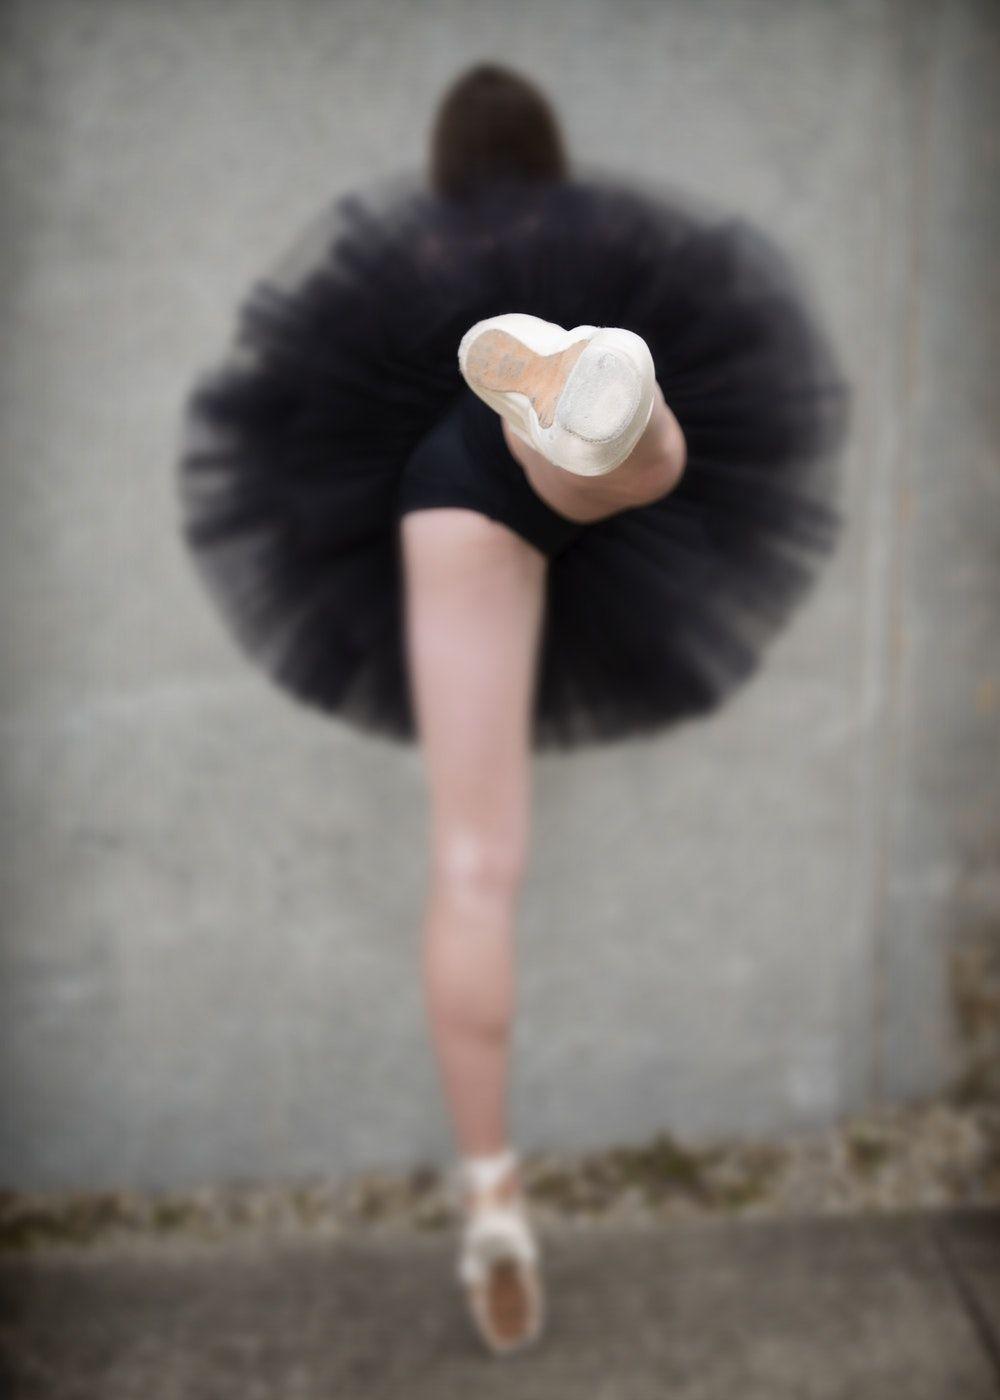 Ballet Shoe Picture. Download Free Image